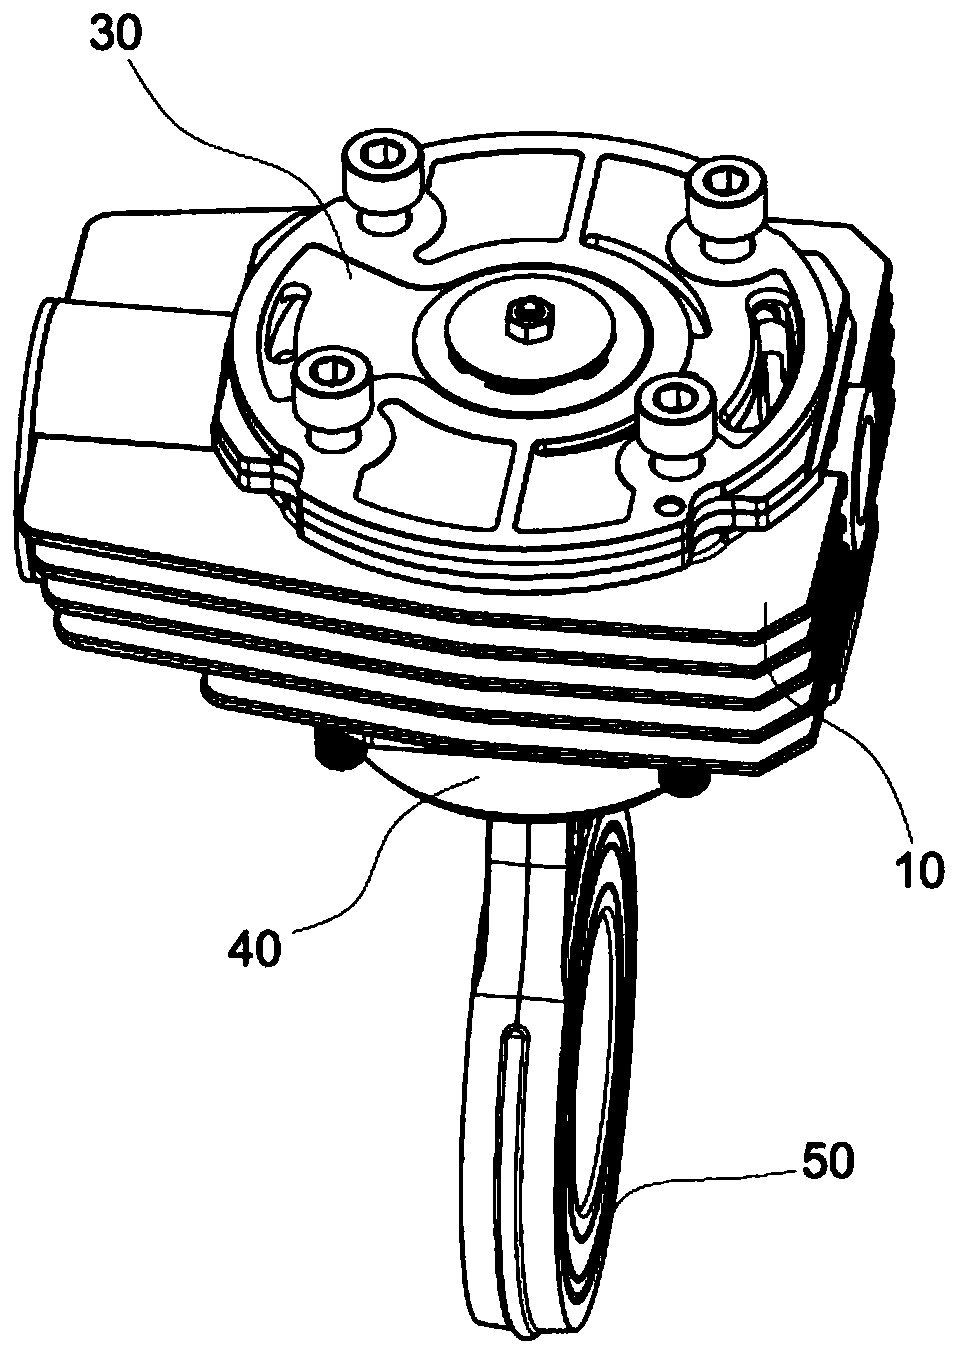 Air compression device and air compressor